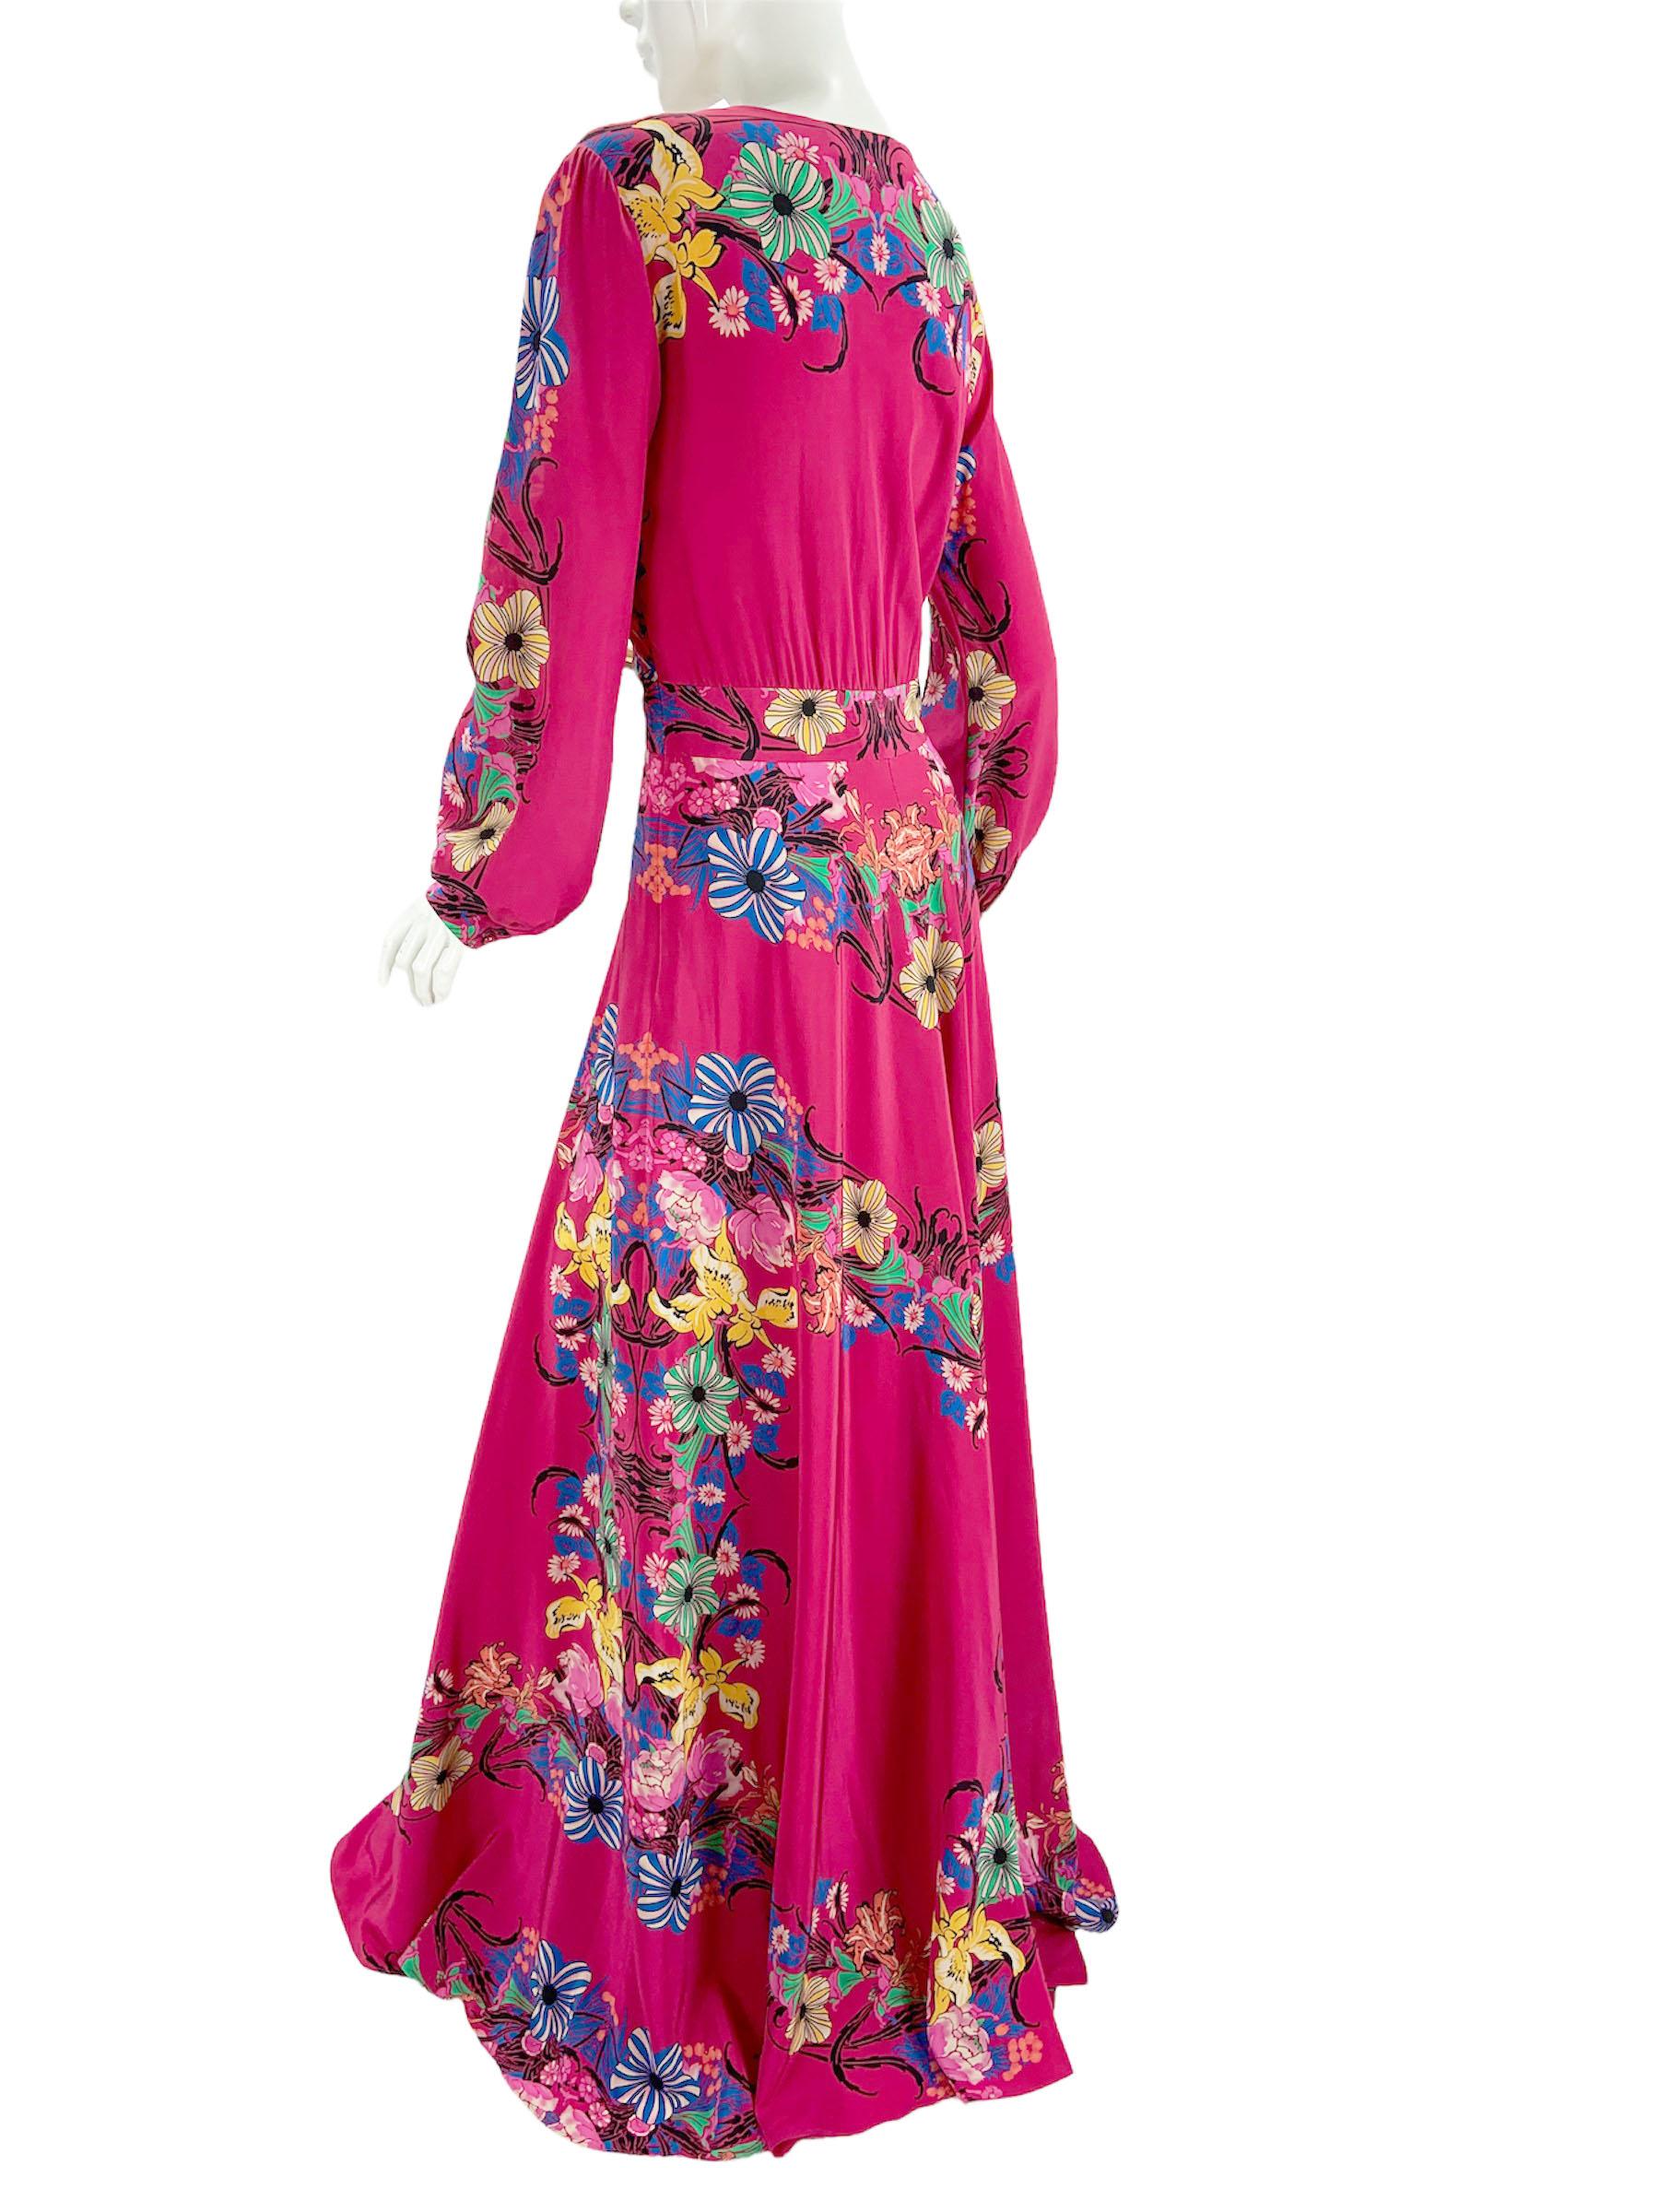 New Etro Silk Floral Print Maxi Dress
Italian size - 42 ( please check measurements ).
100% Silk, Fuchsia Background with Multiple Print of Colorful Flowers - Yellow, Orange, Blue, Green, Pink and White.
V-Neck Plunge, Ruched Top, Button Closure